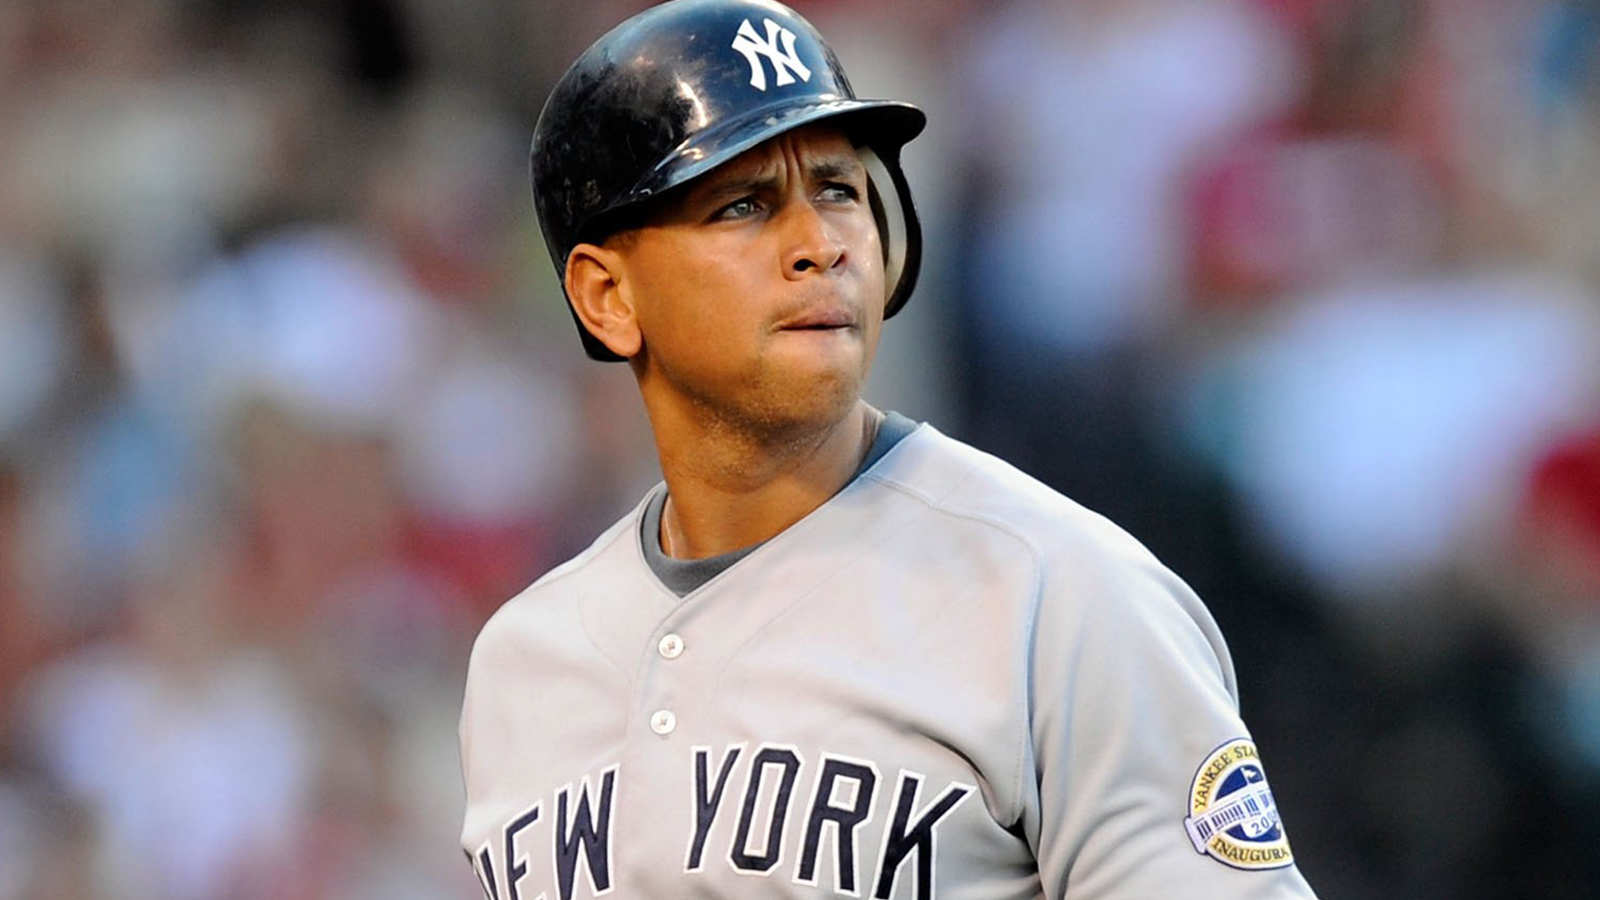 Alex Rodriguez Suspended: Are There Any Good Guys in Baseball?